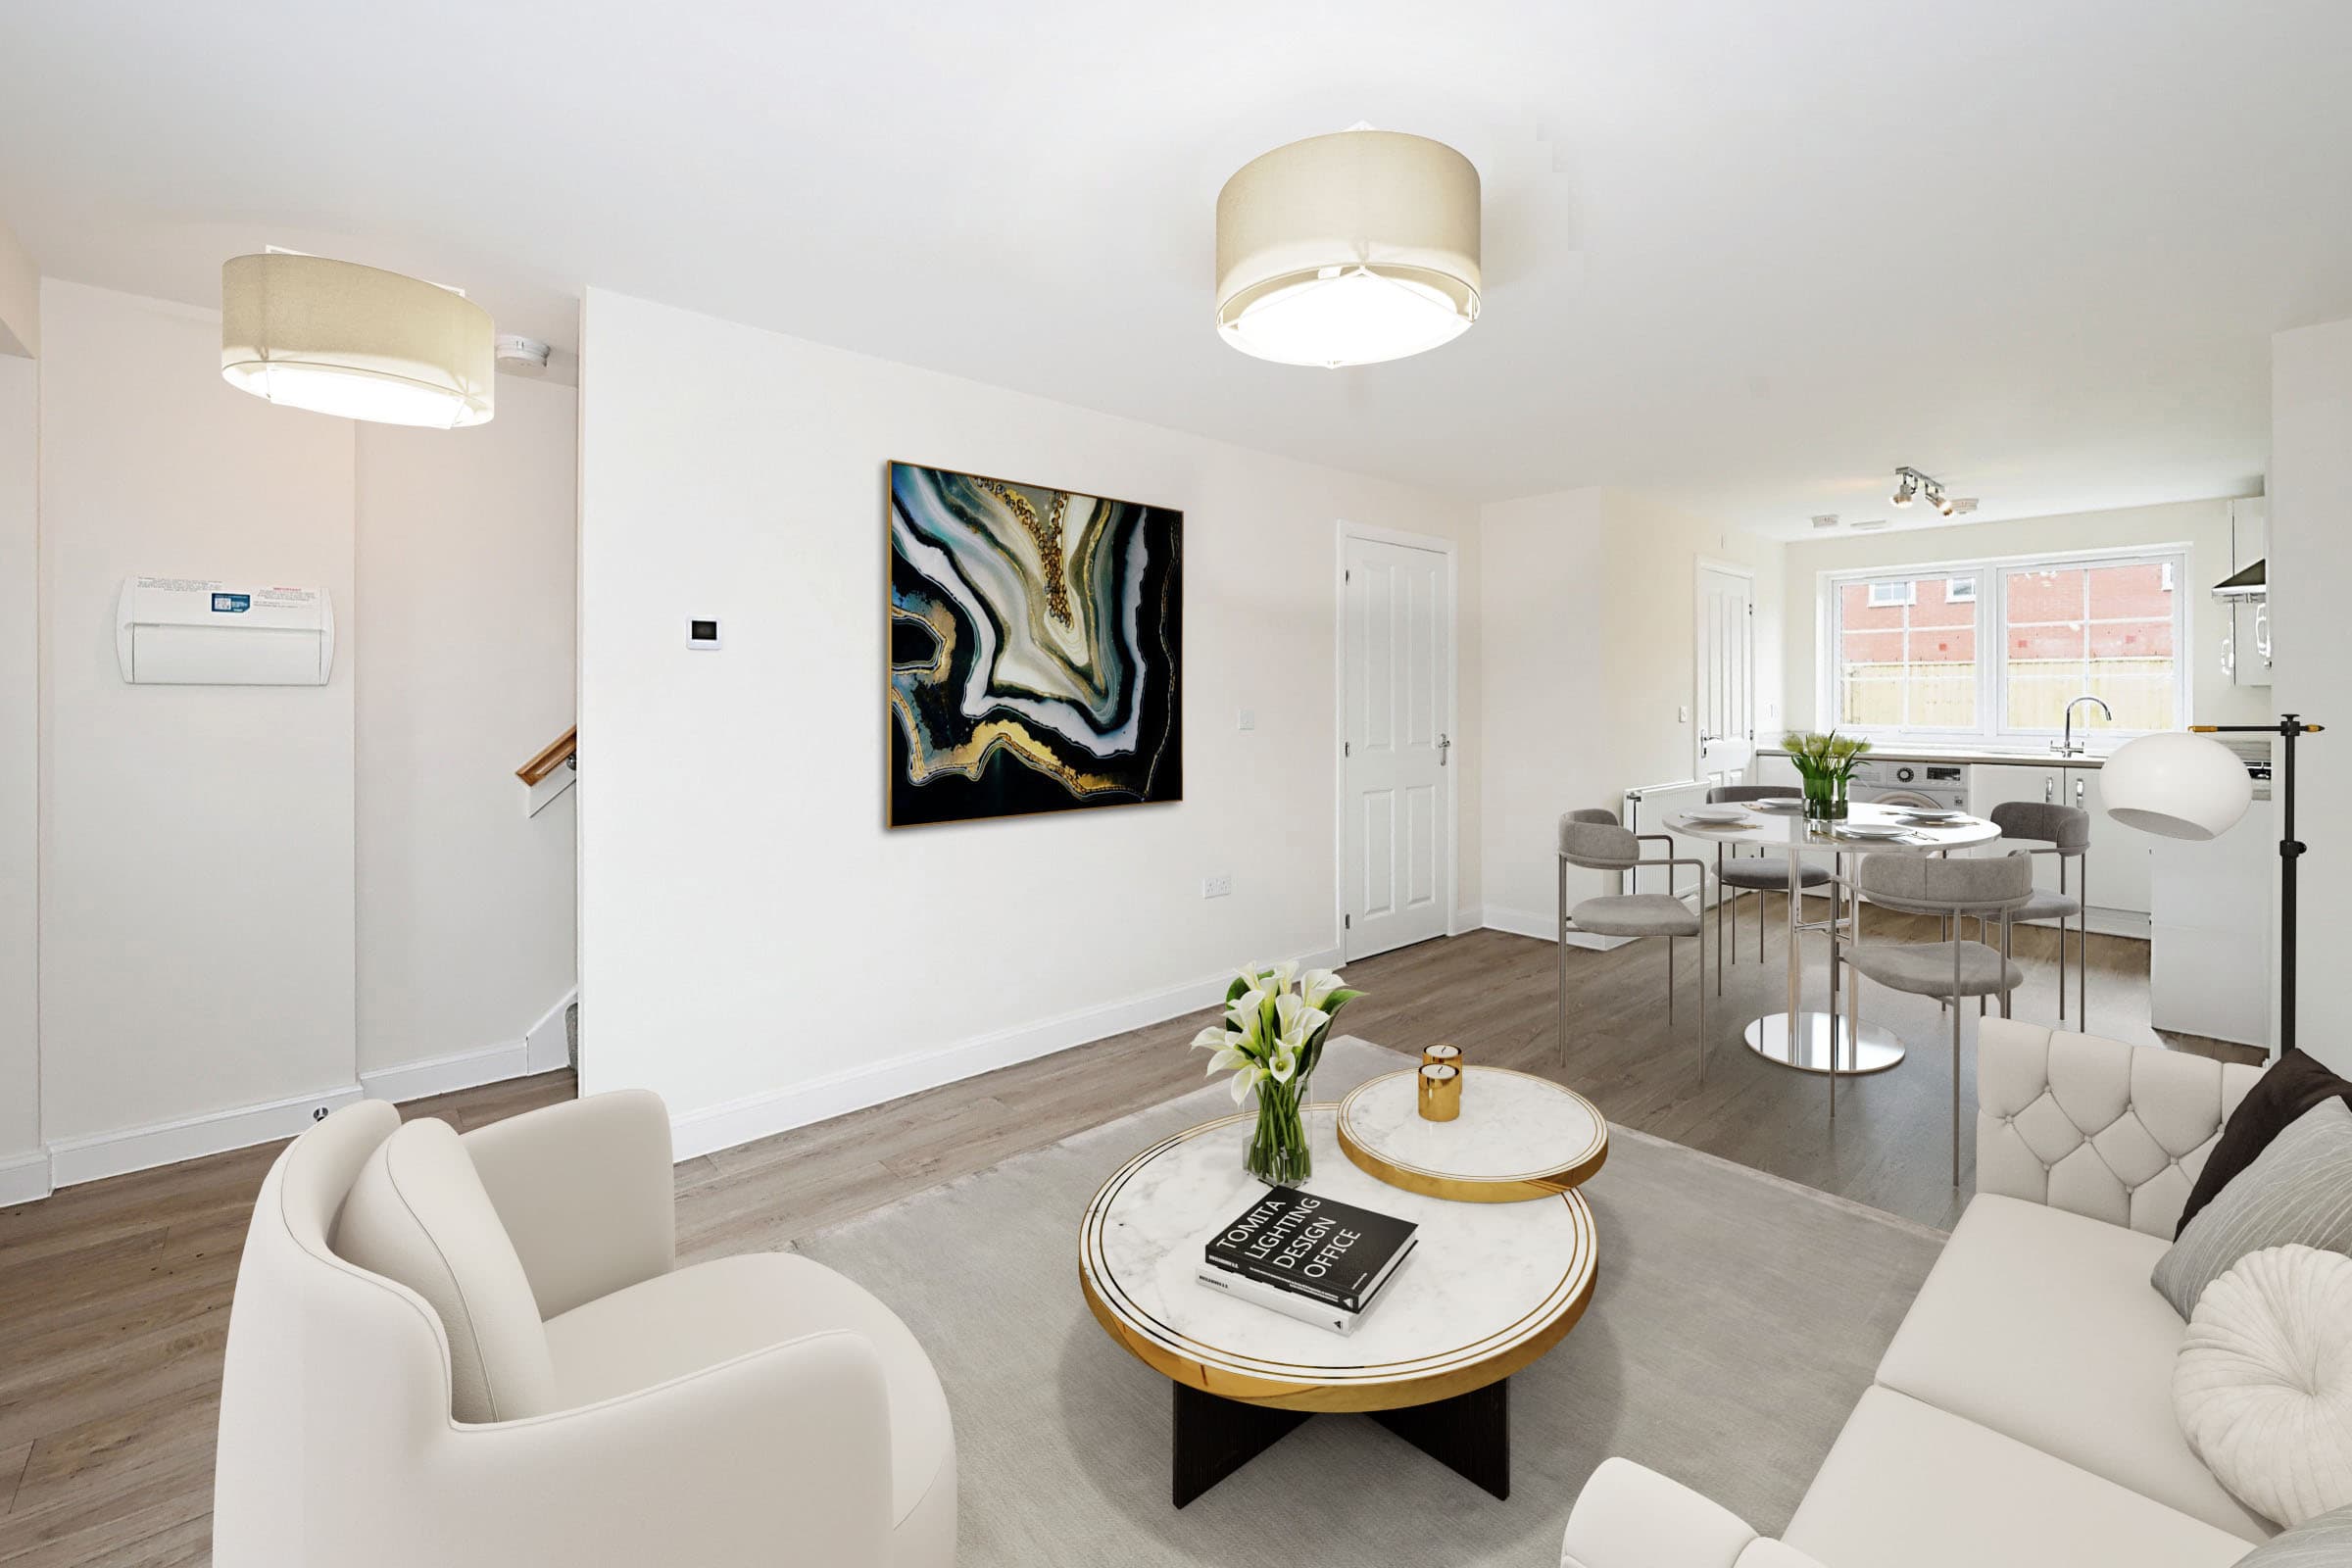 An internal image of Rogerson Gardens by Legal & General Affordable Homes - available to purchase through Shared Ownership on Share to Buy!